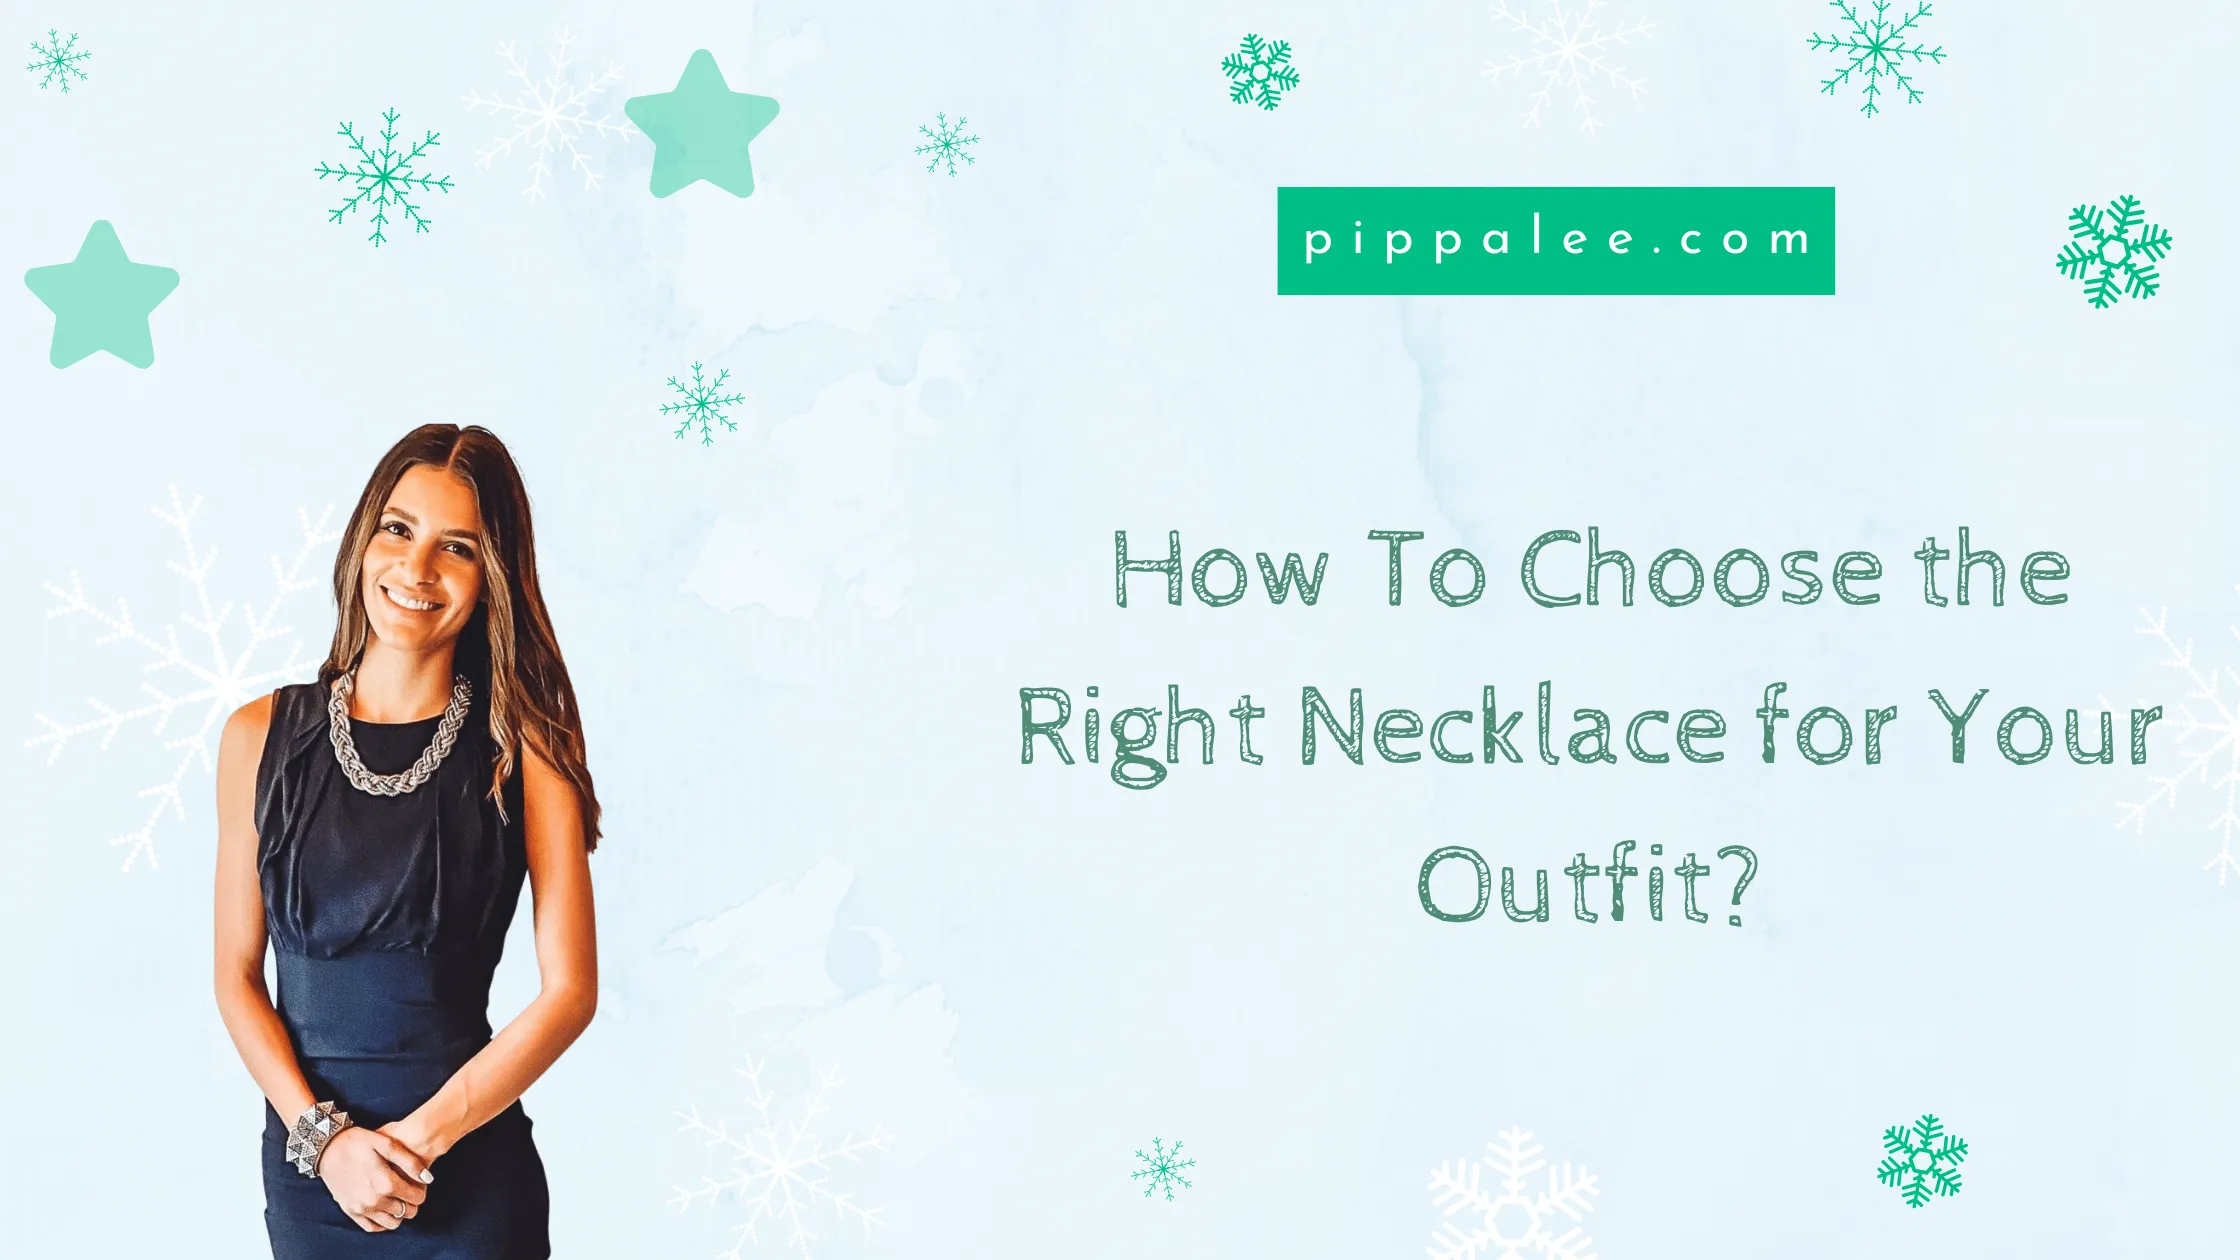 How To Choose the Right Necklace for Your Outfit?